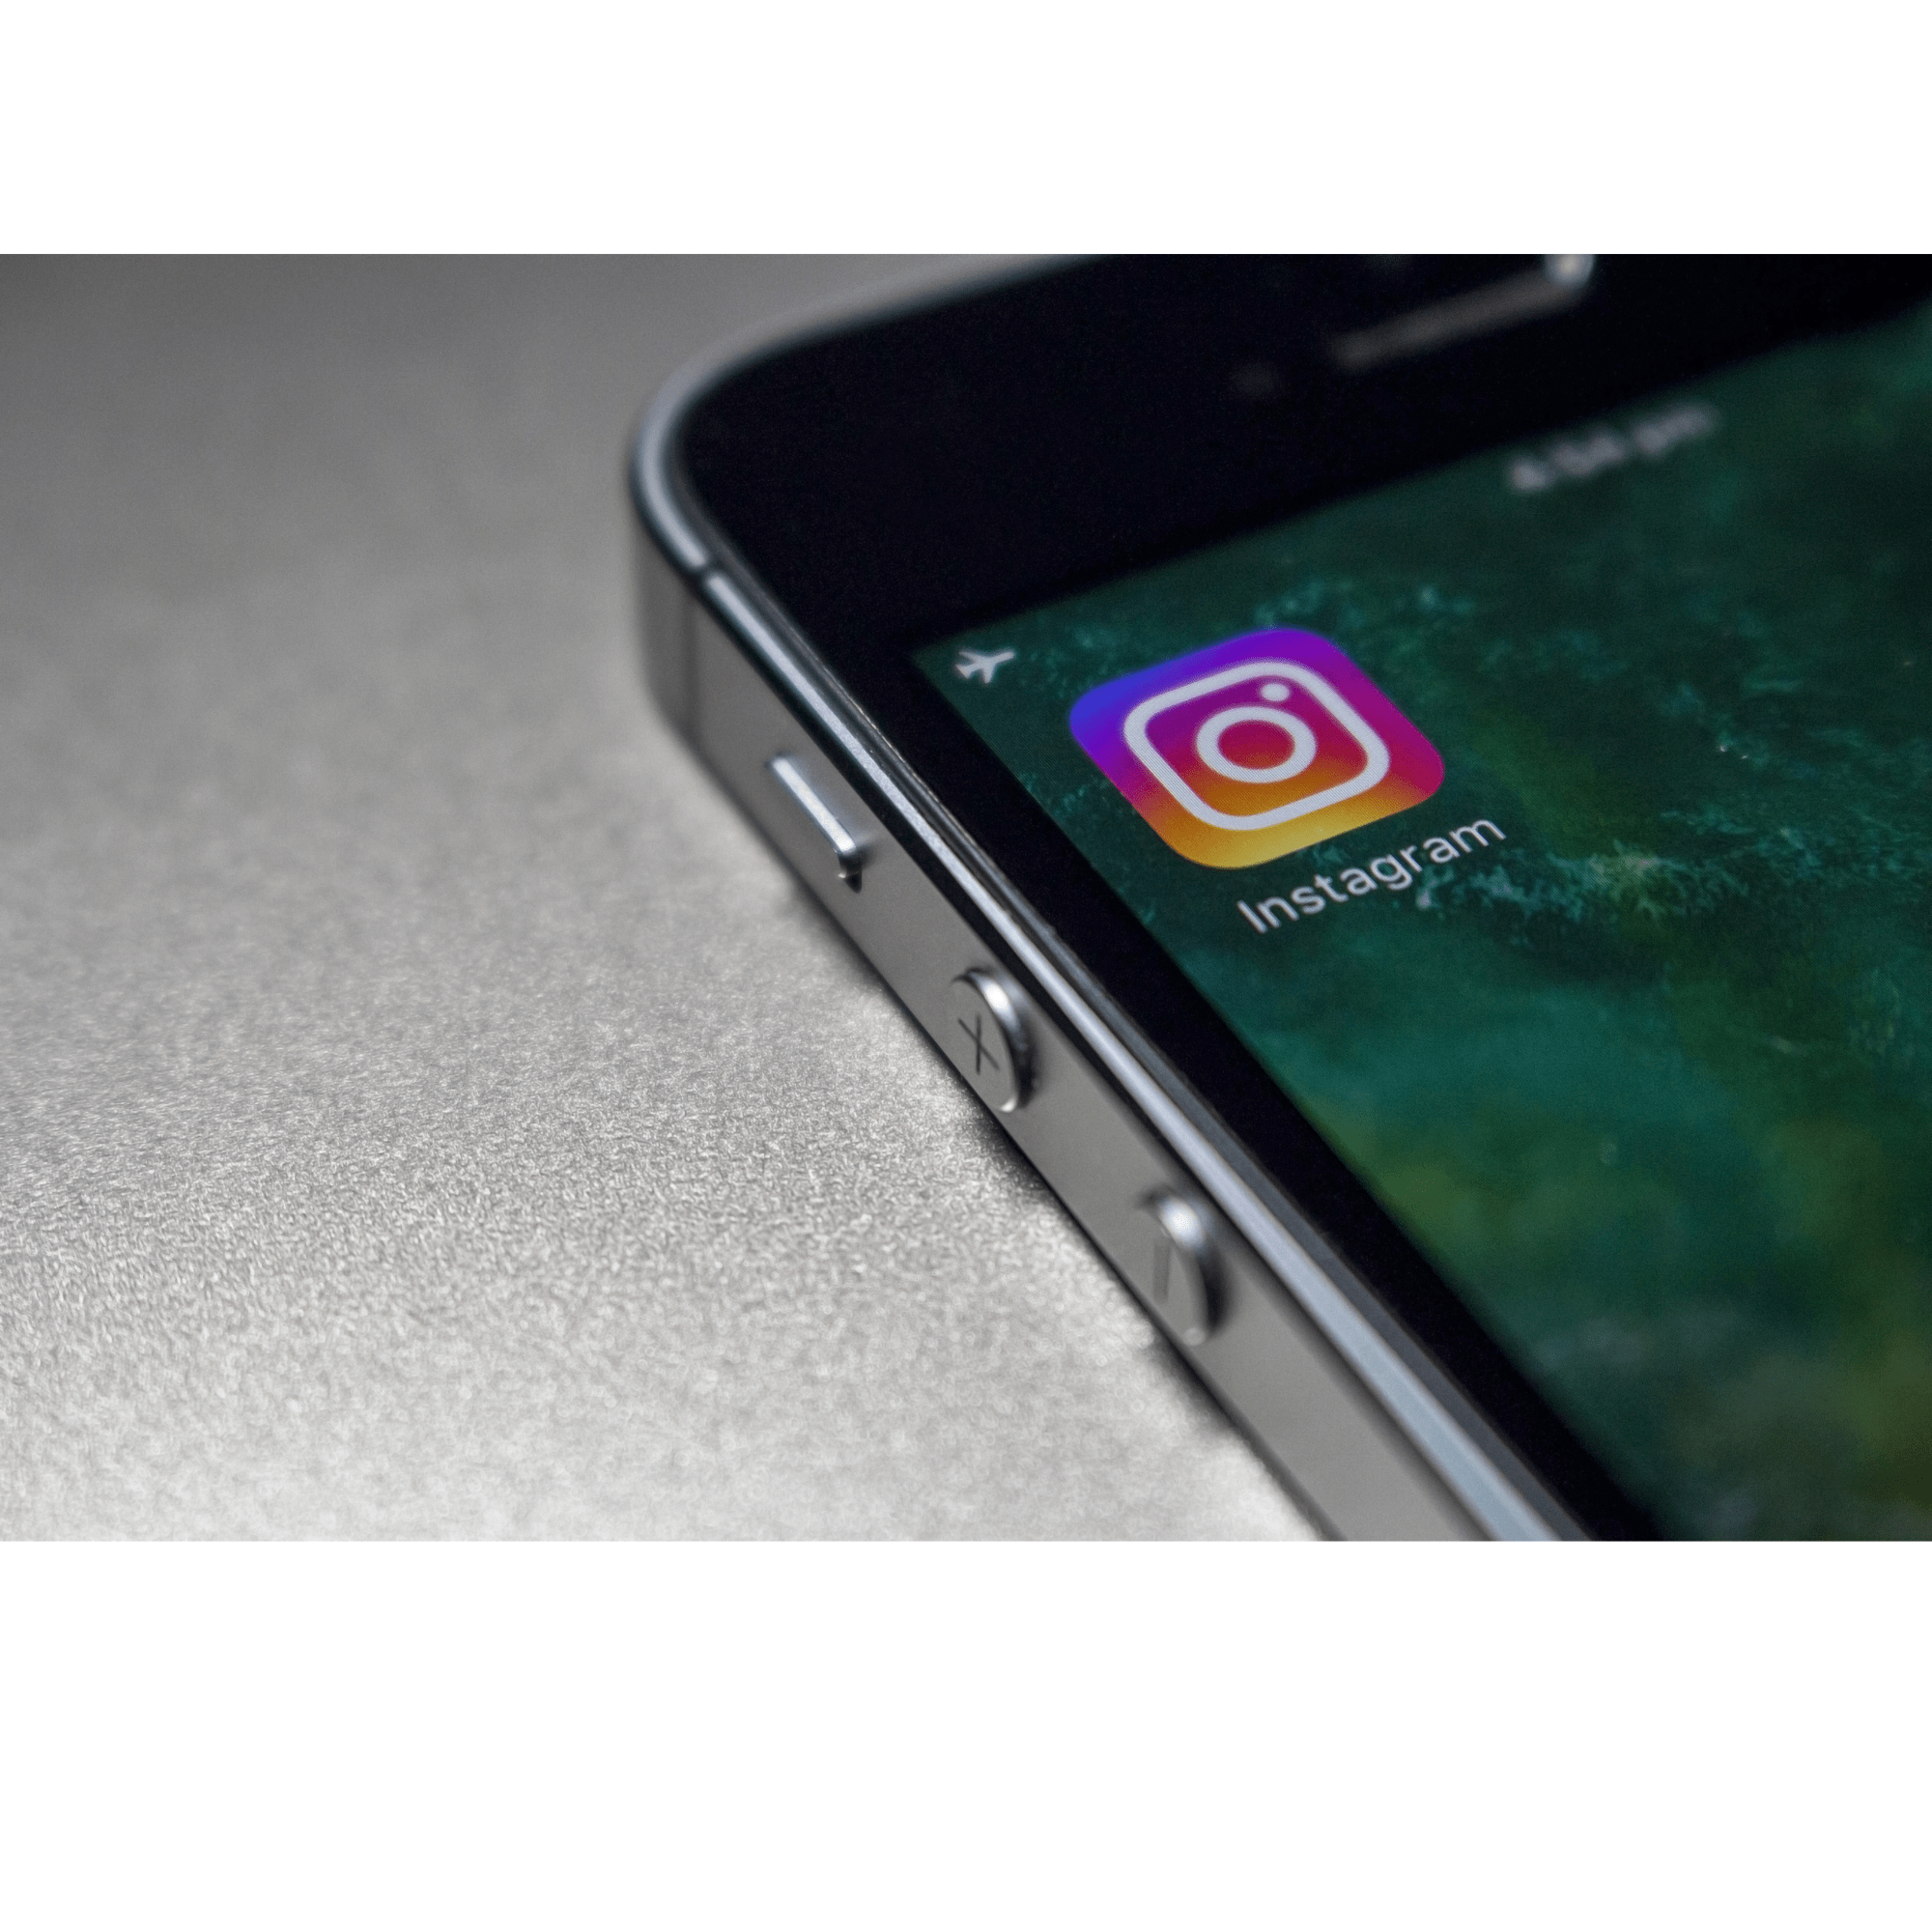 Instagram is changing the face of social media don’t miss!